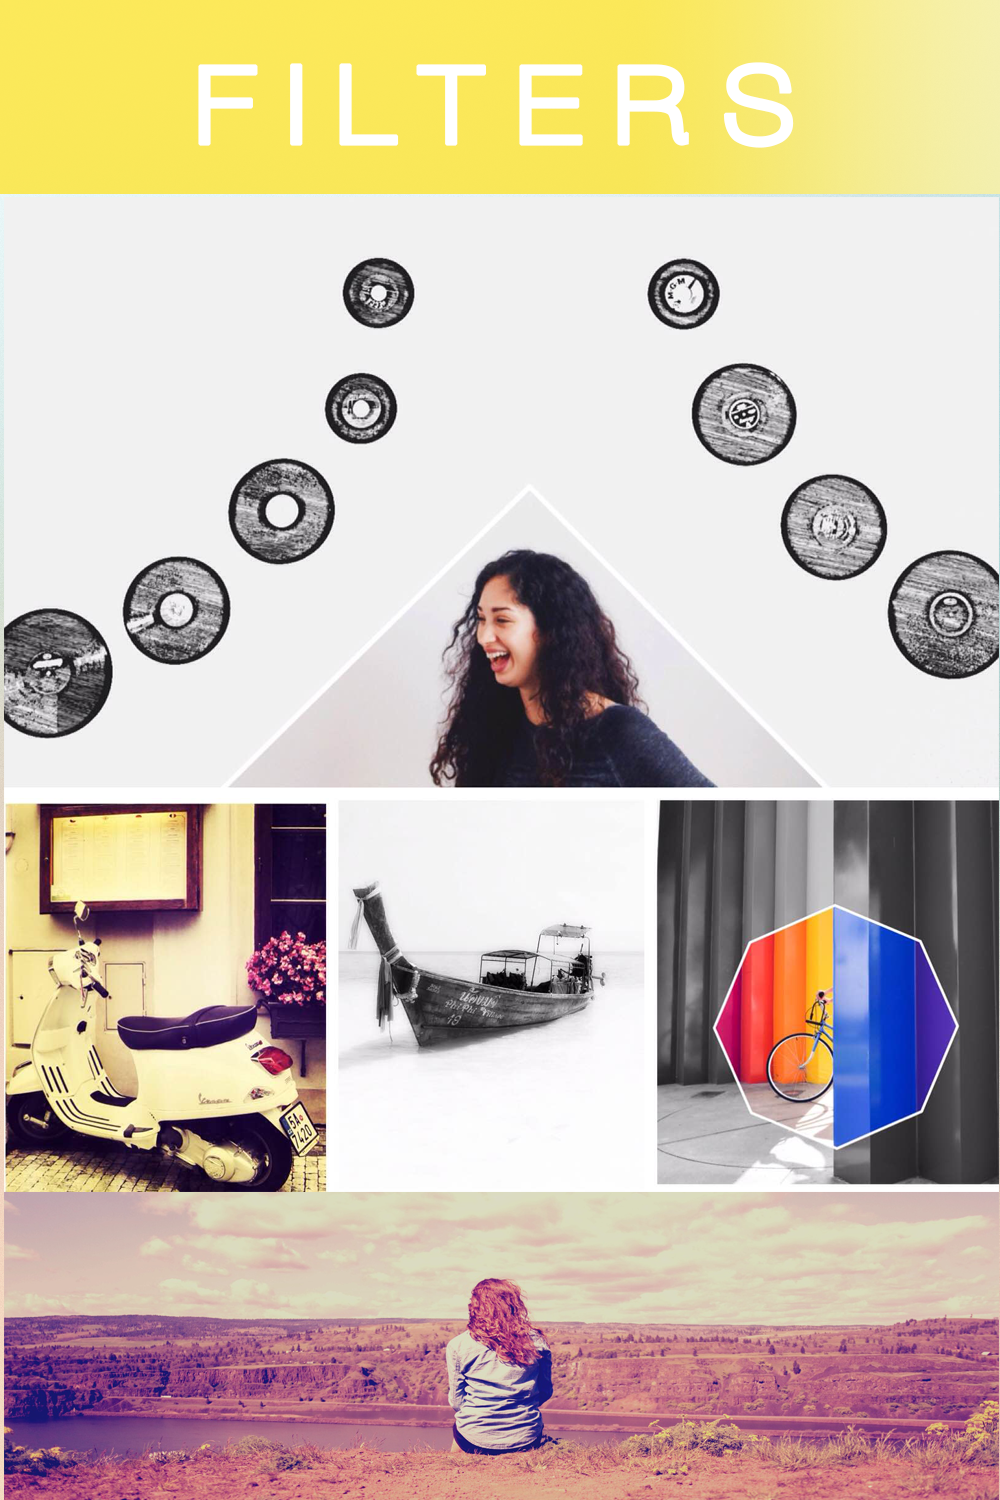 overam uses geometry to reshape photo editing on android filters